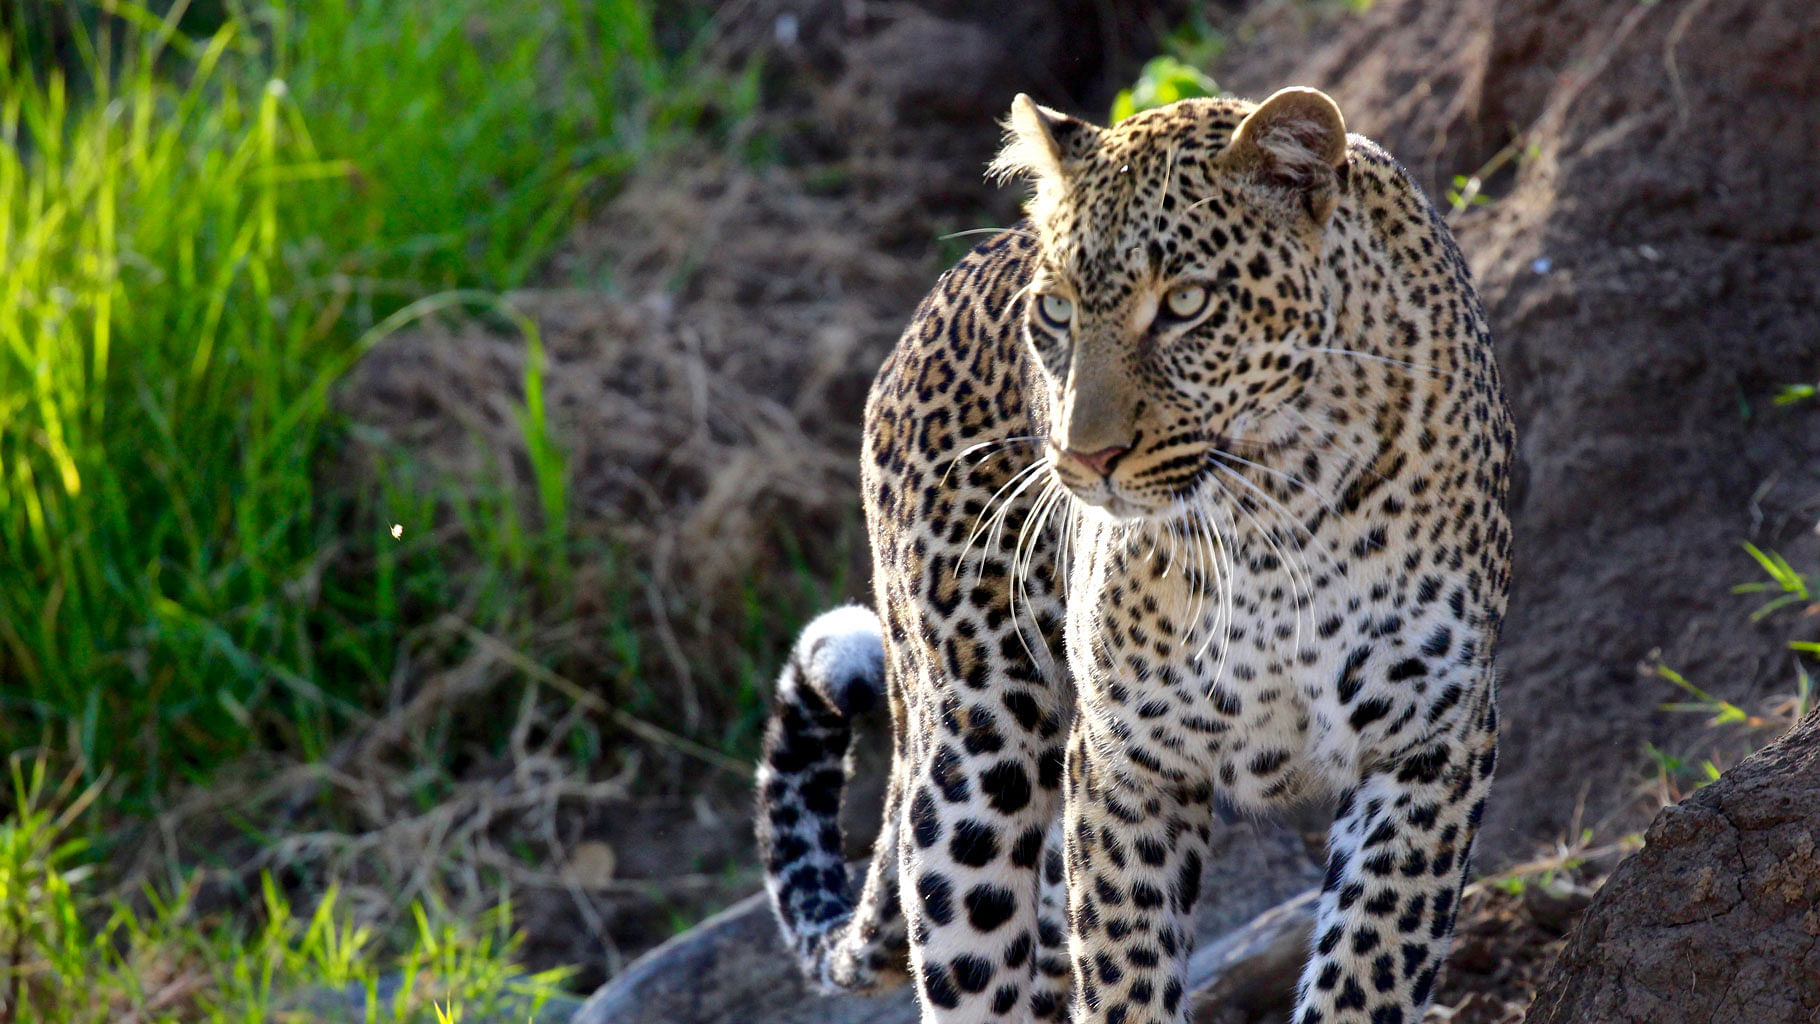 Photo for representation: An elusive and magnificent big cat – the leopard.&nbsp;